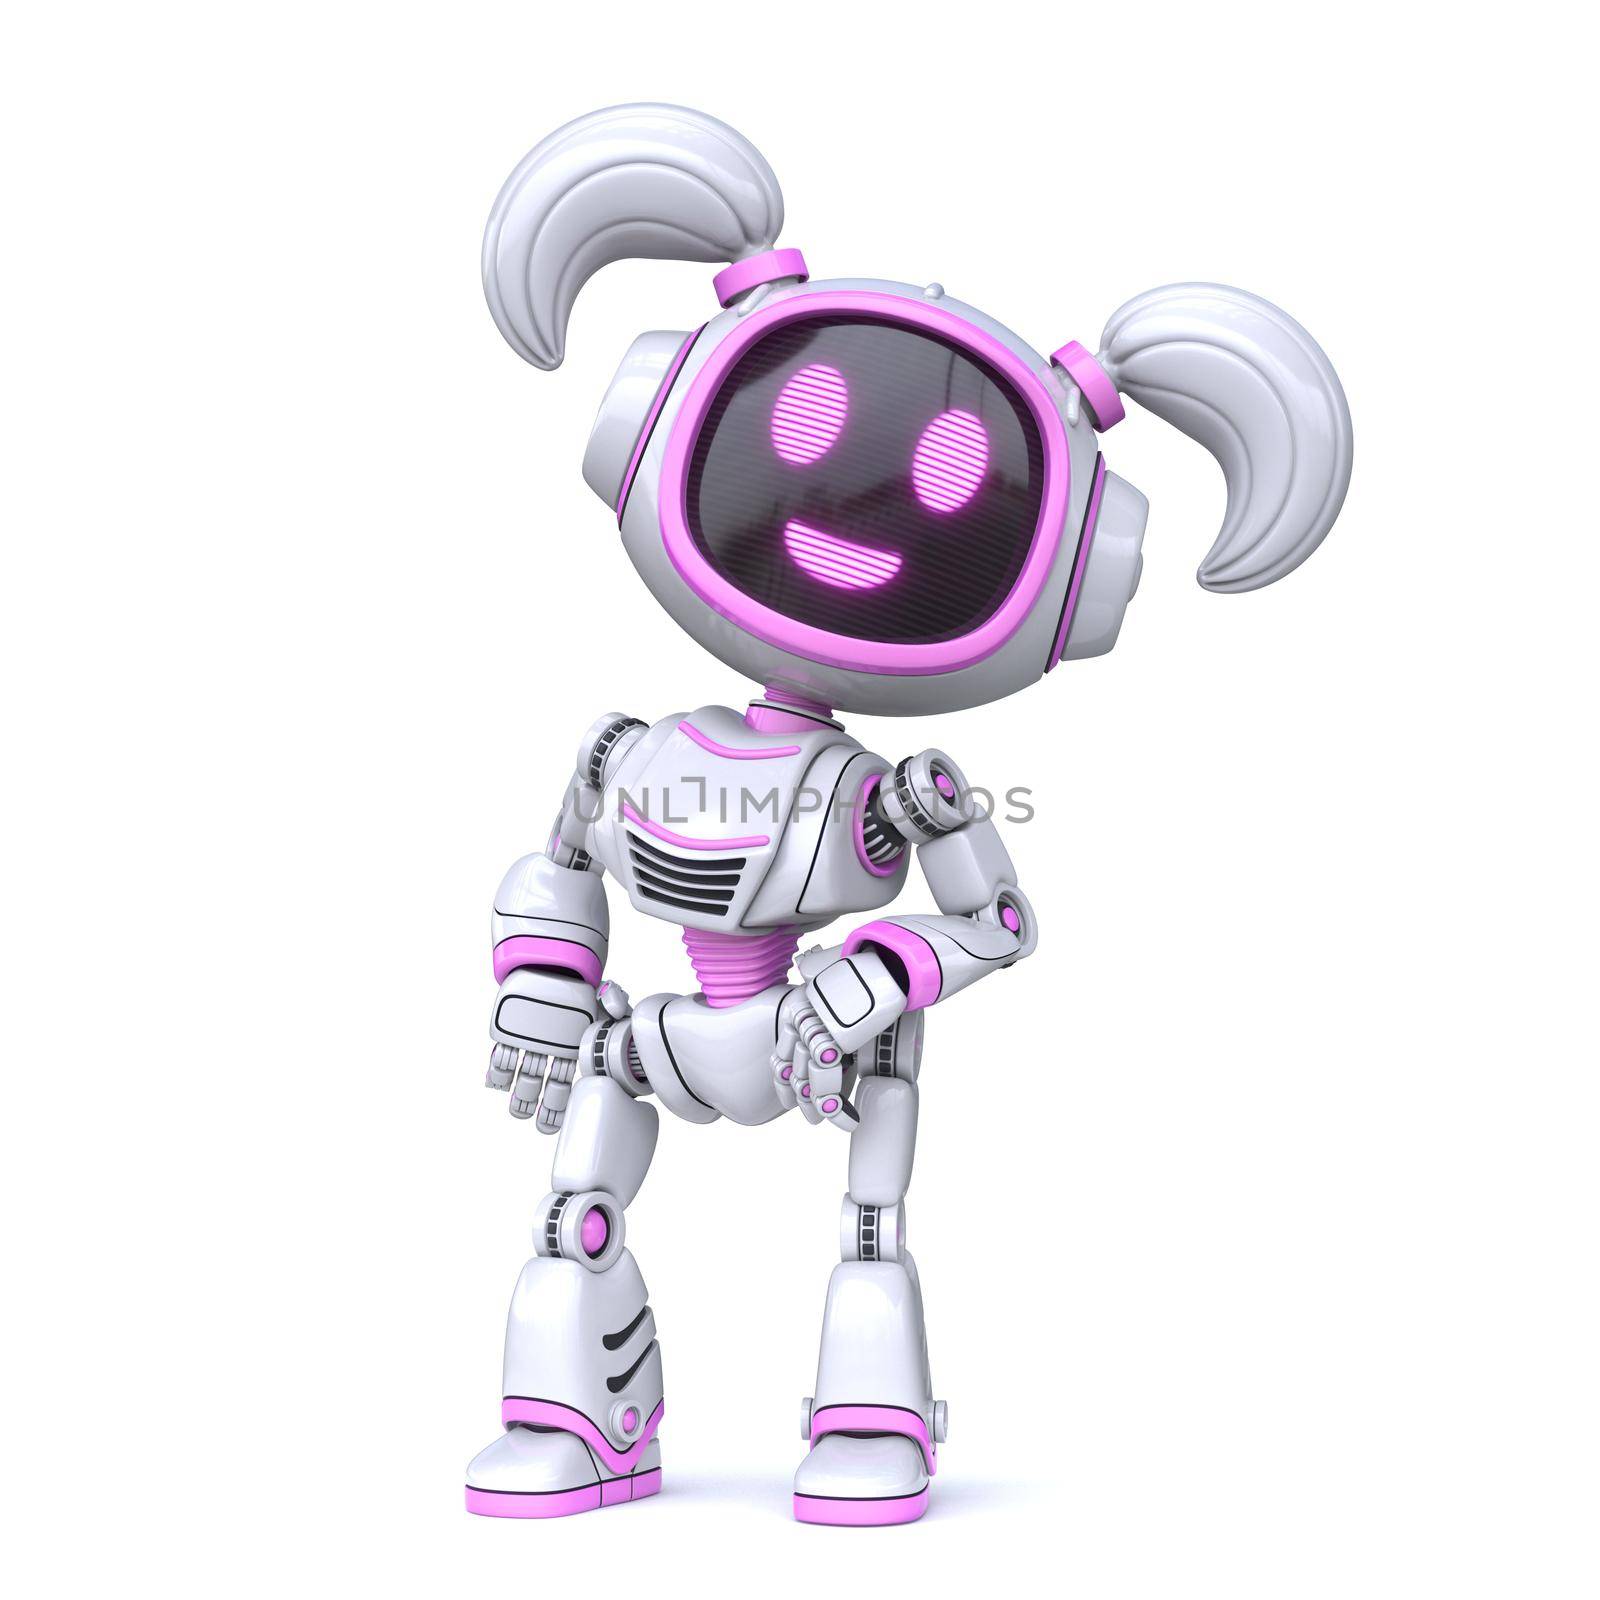 Cute pink girl robot pose as a photo model 3D by djmilic